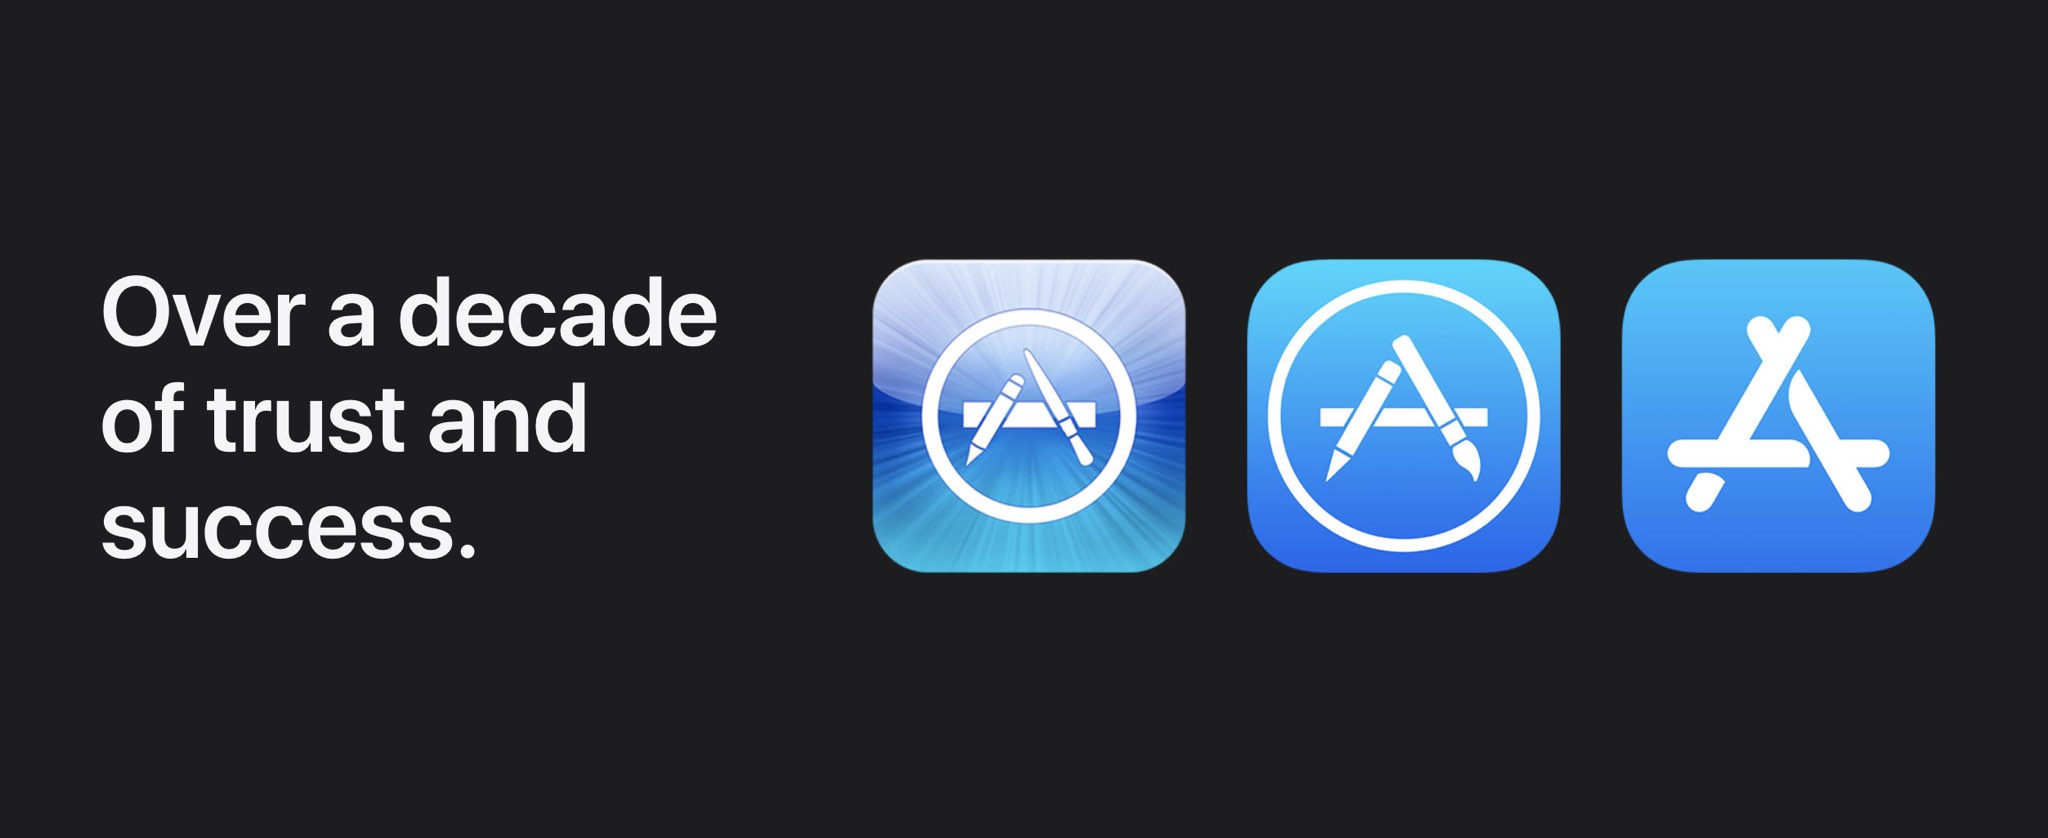 Apple's promotional banner for the App Store